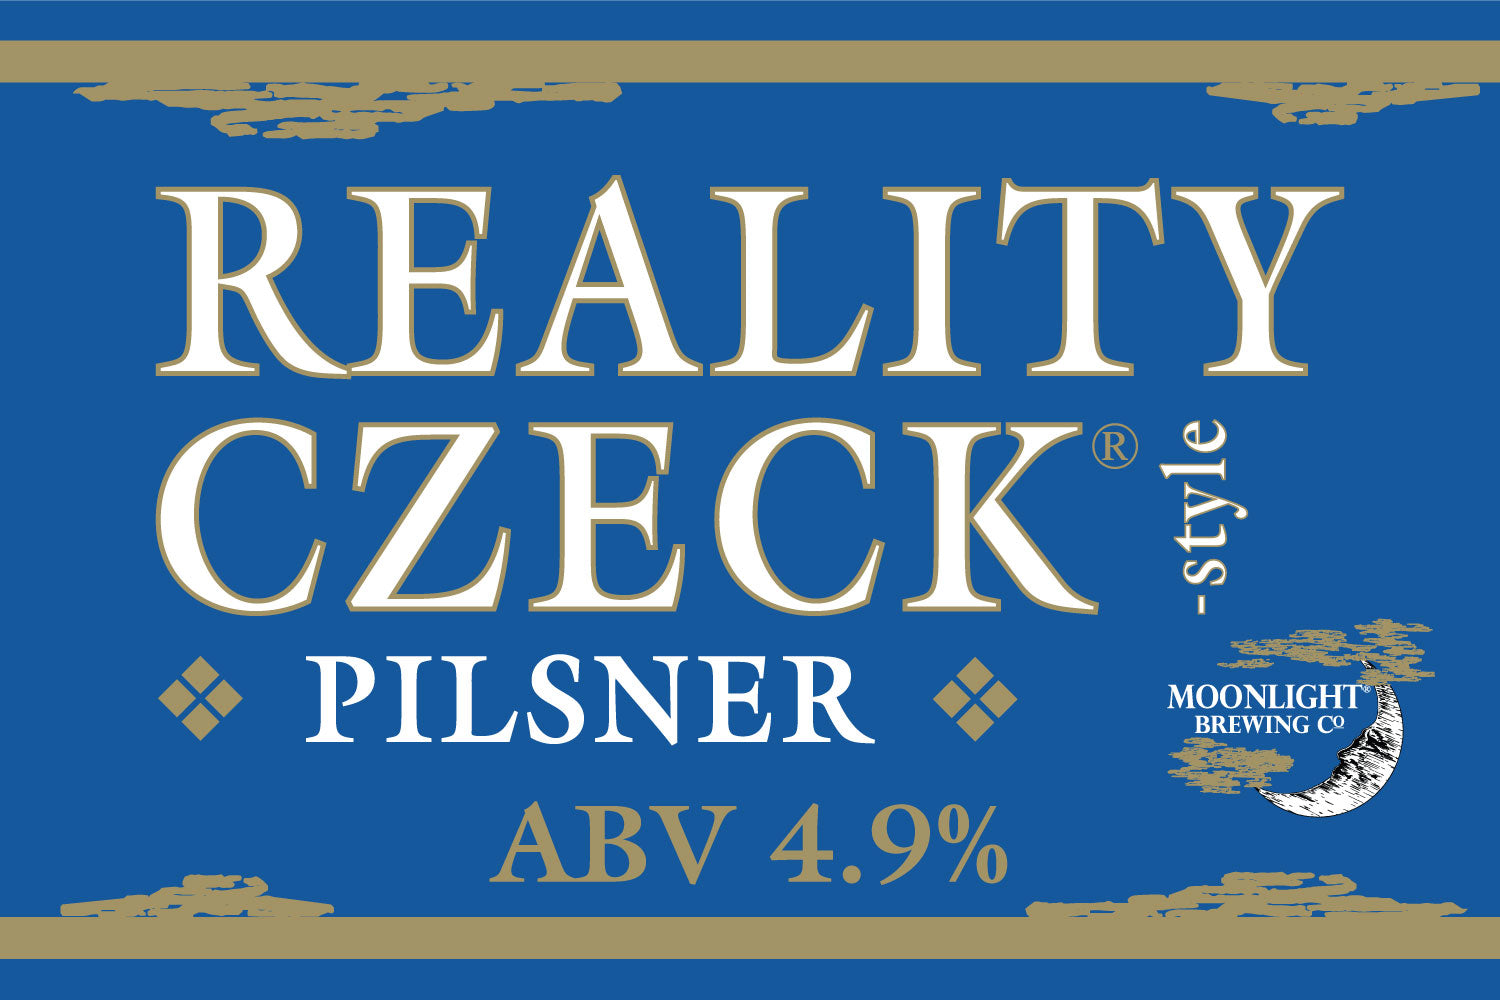 Reality Czeck Pilsner beer sign with Moonlight Brewing logo